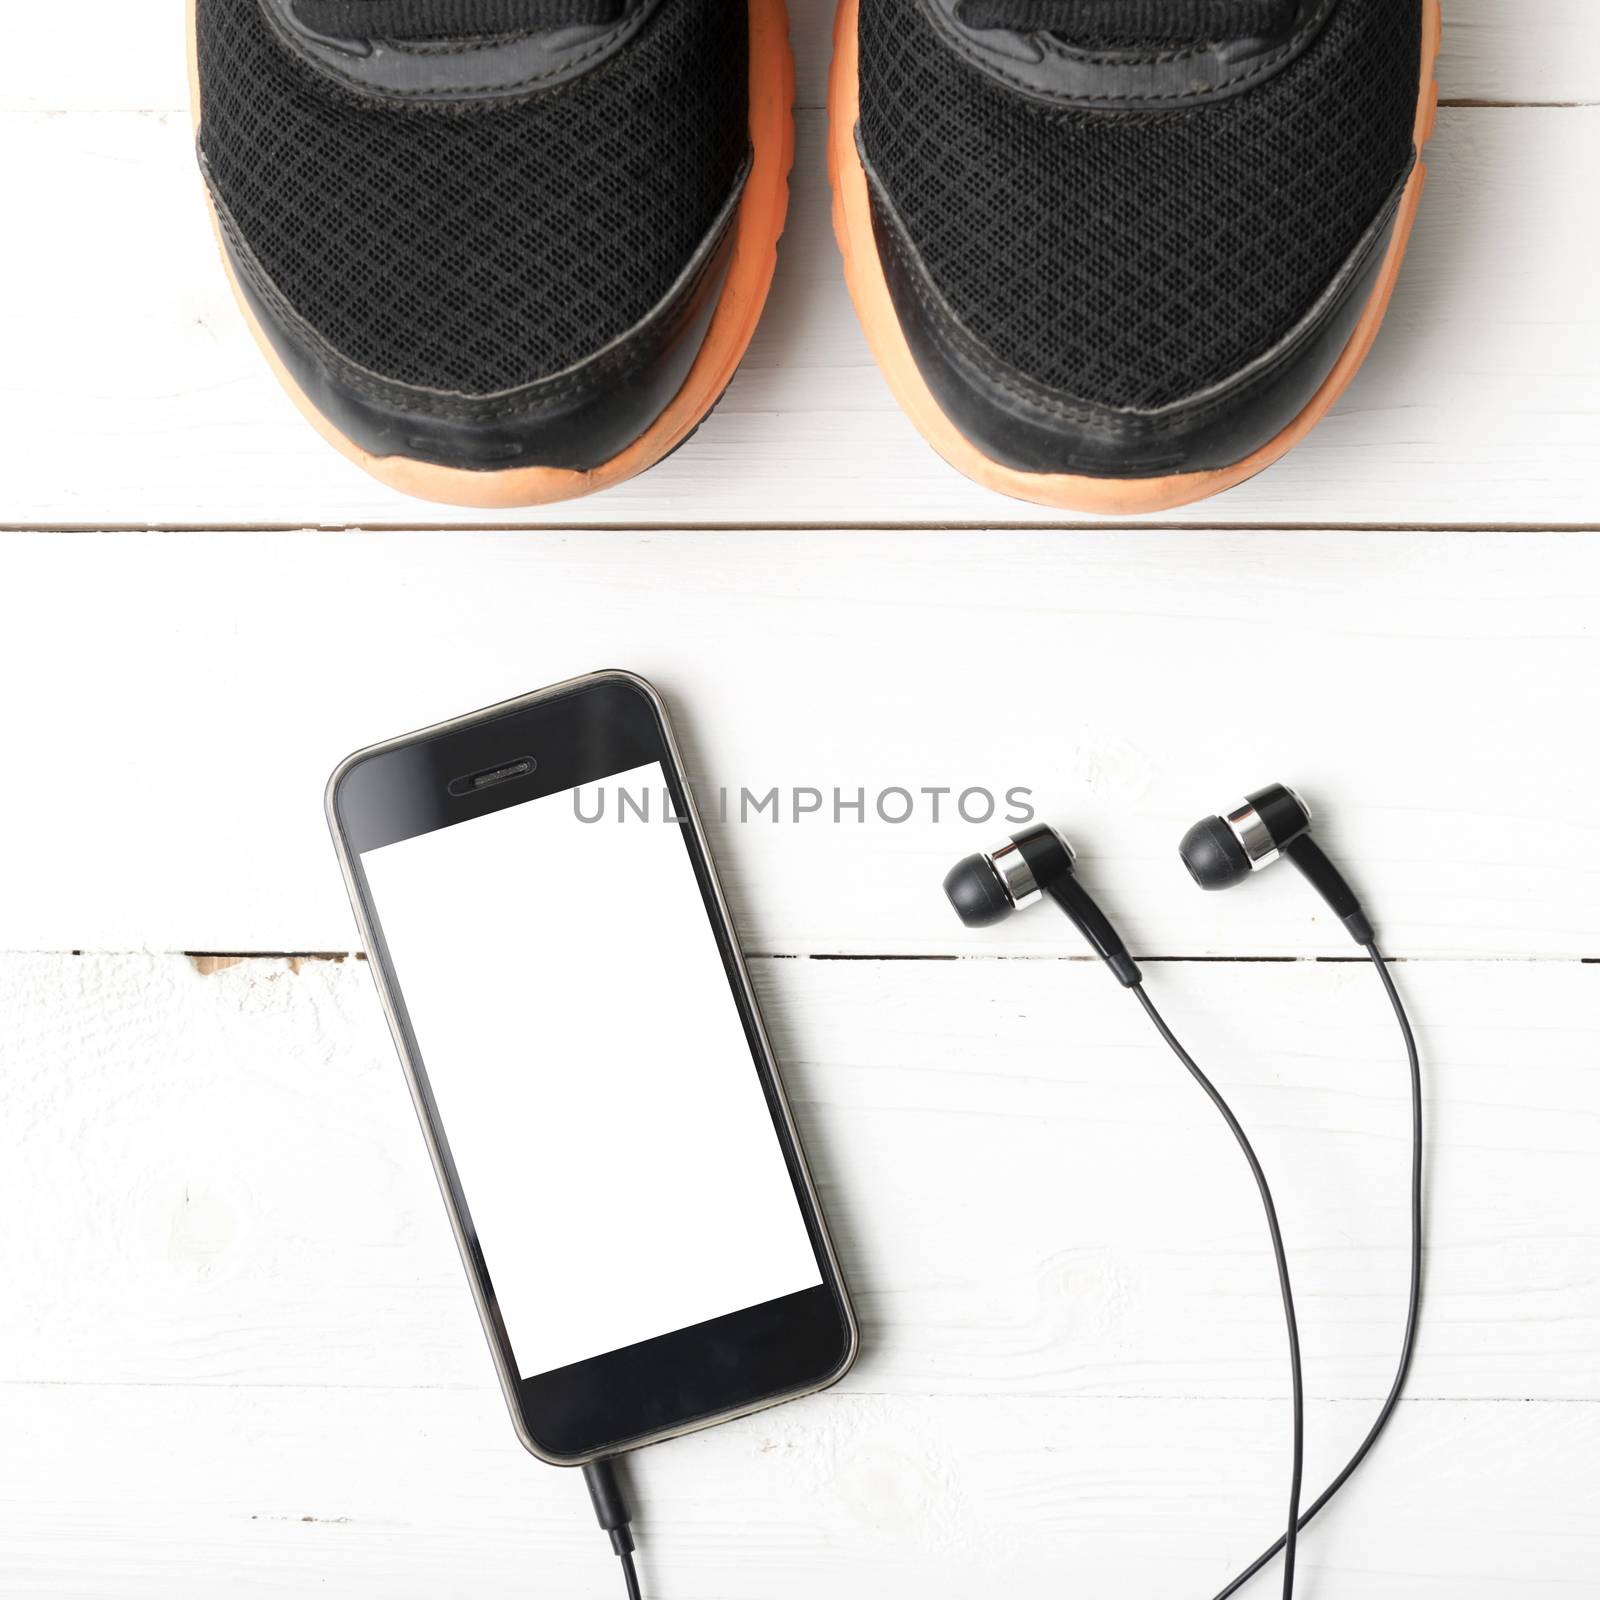 running shoes and phone by ammza12